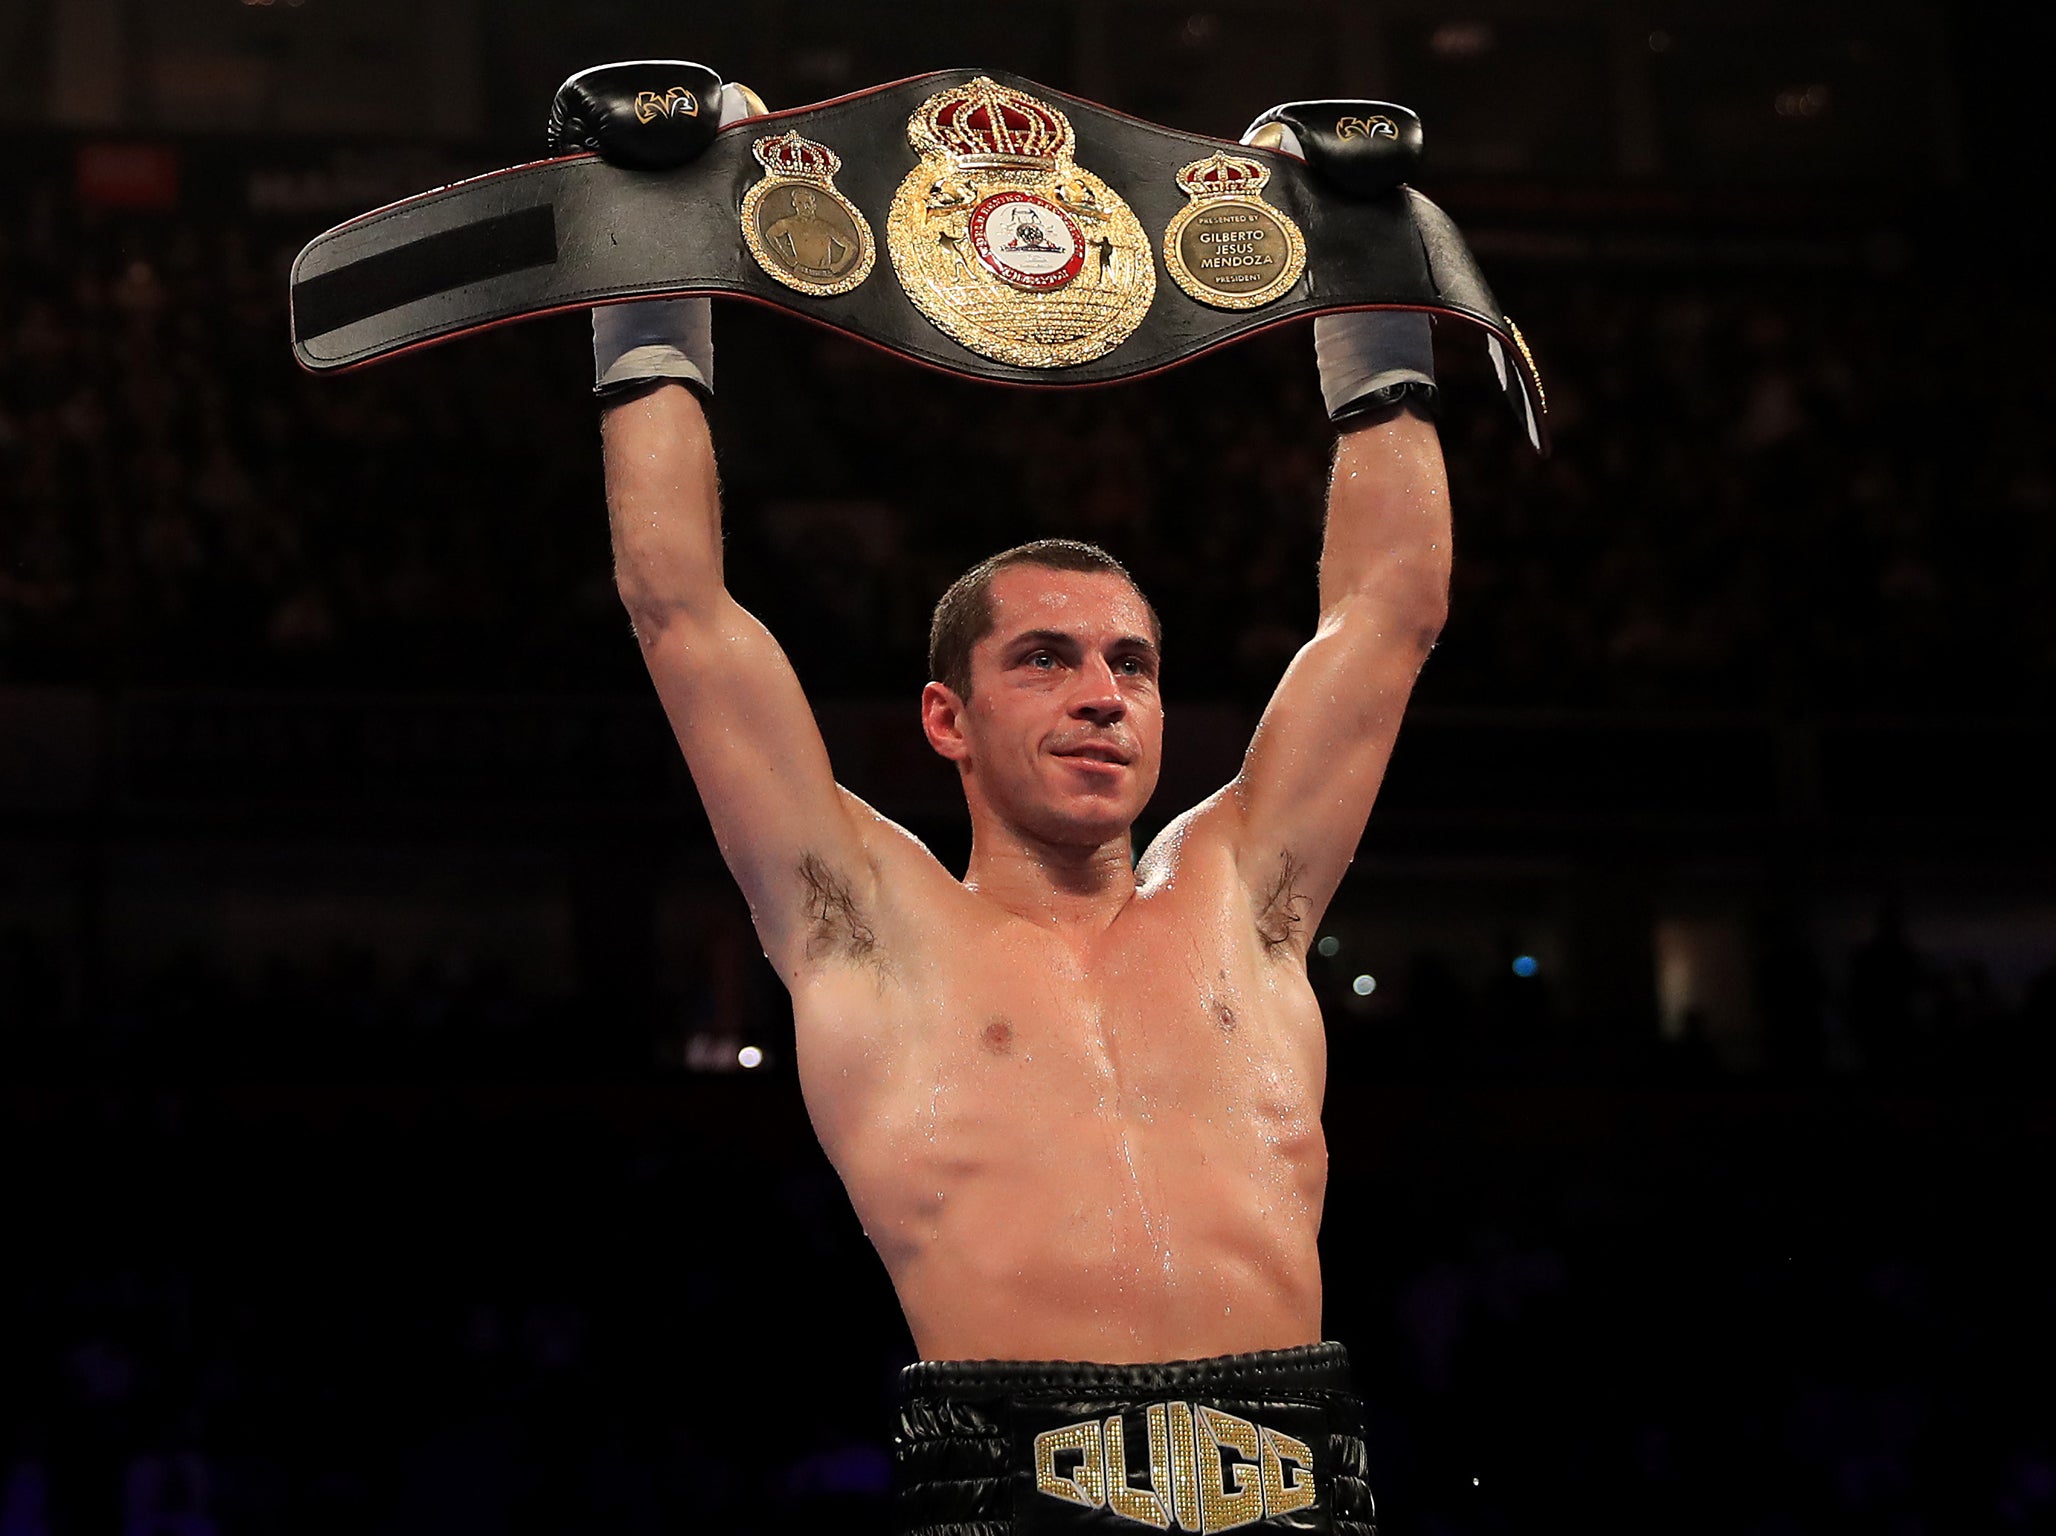 Quigg also returns to action